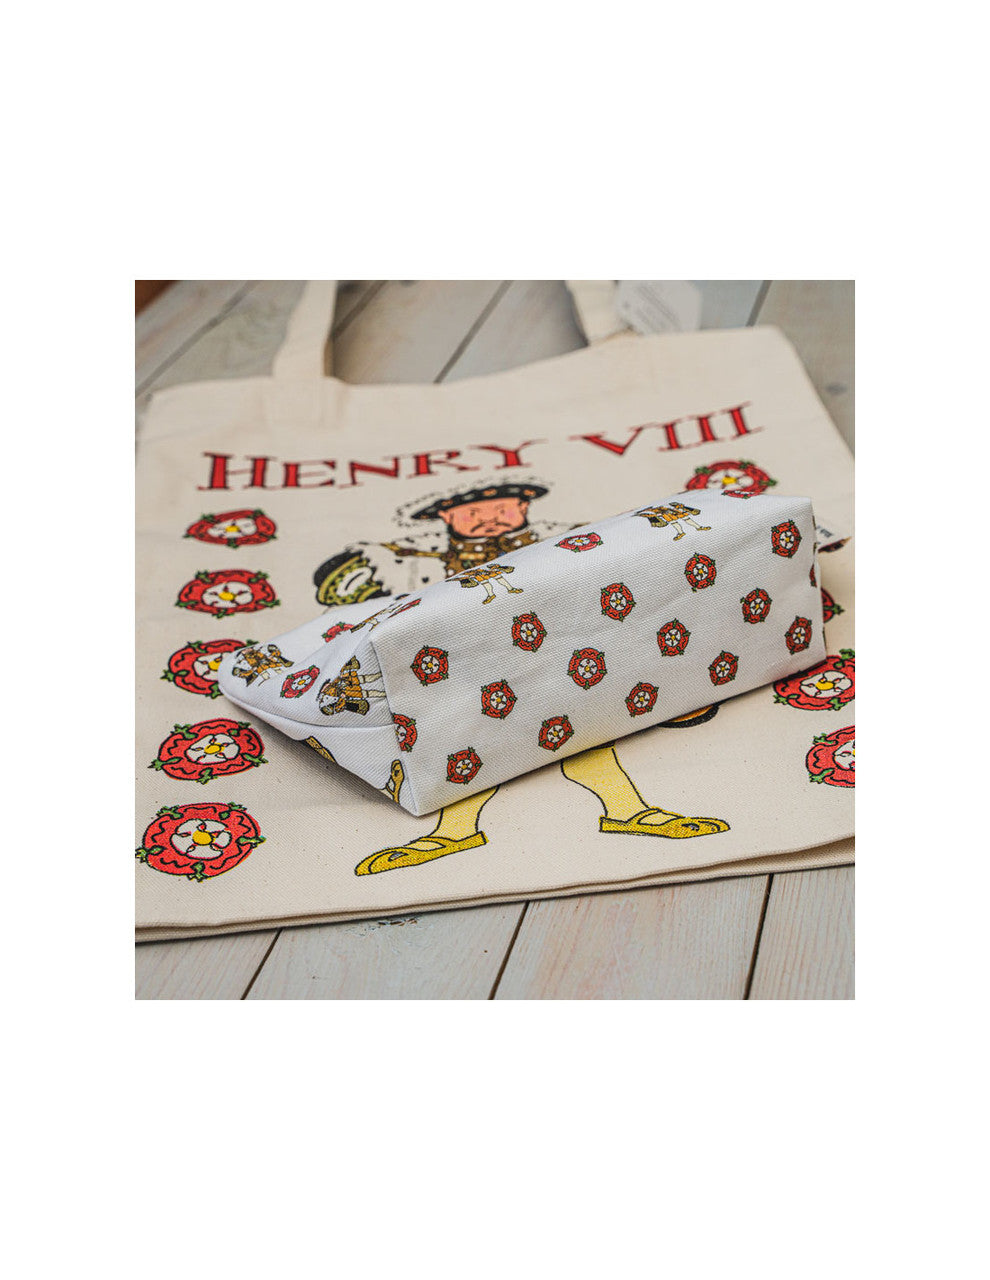 Henry VIII and his wives cosmetic bag/pencil case from Alison Gardiner.